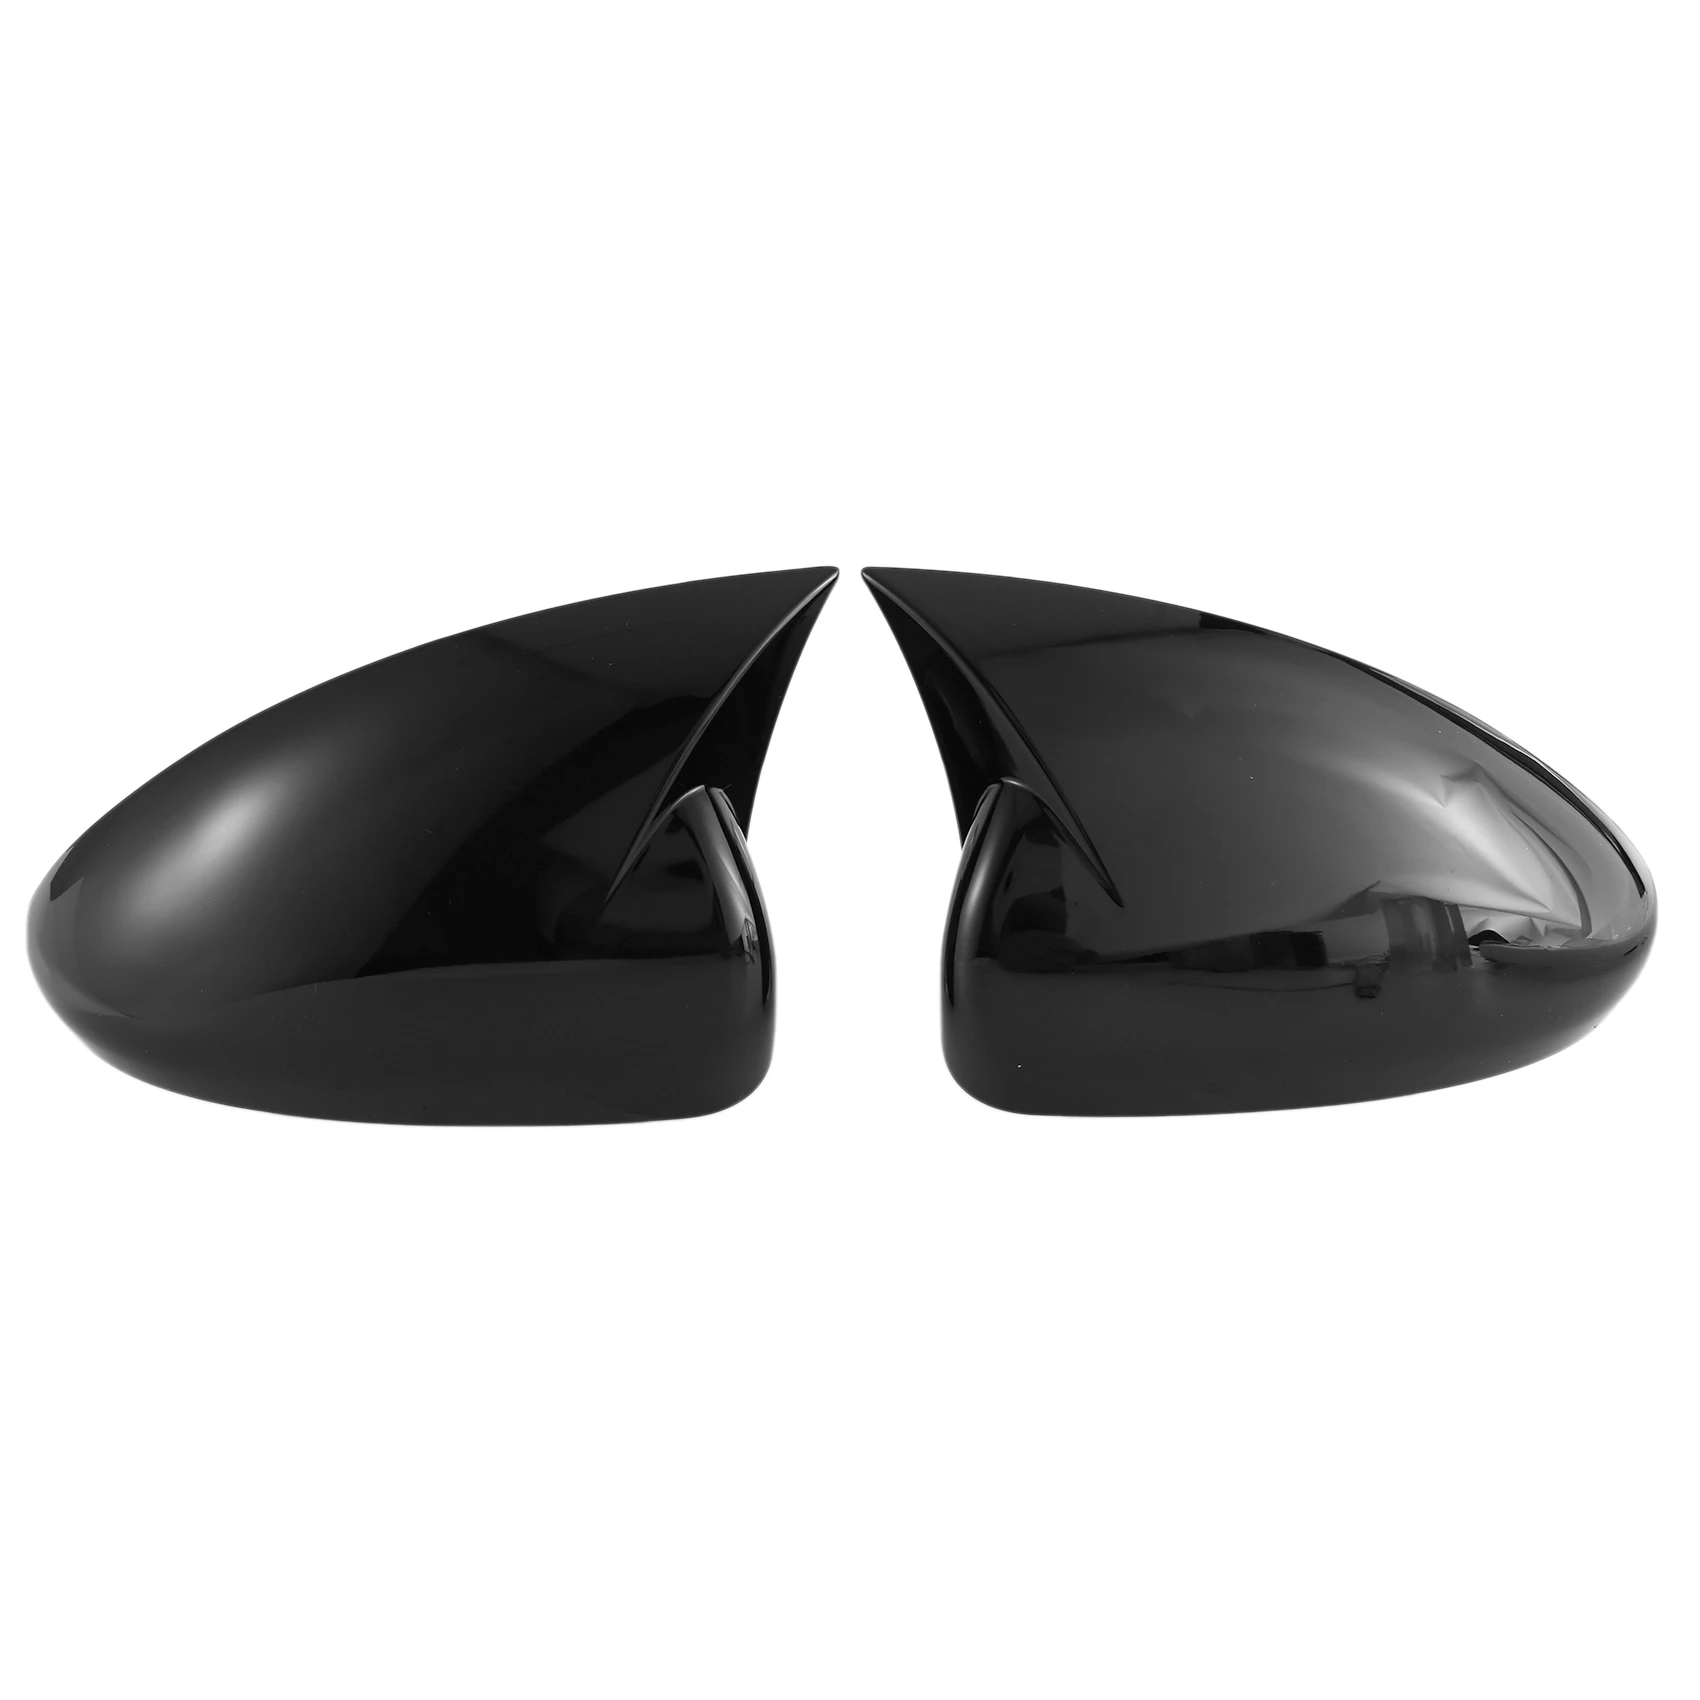 

Car Glossy Black Ox Horn Rearview Side Glass Mirror Cover Trim Frame Side Mirror Caps for Chevrolet Cruze 2009-2015